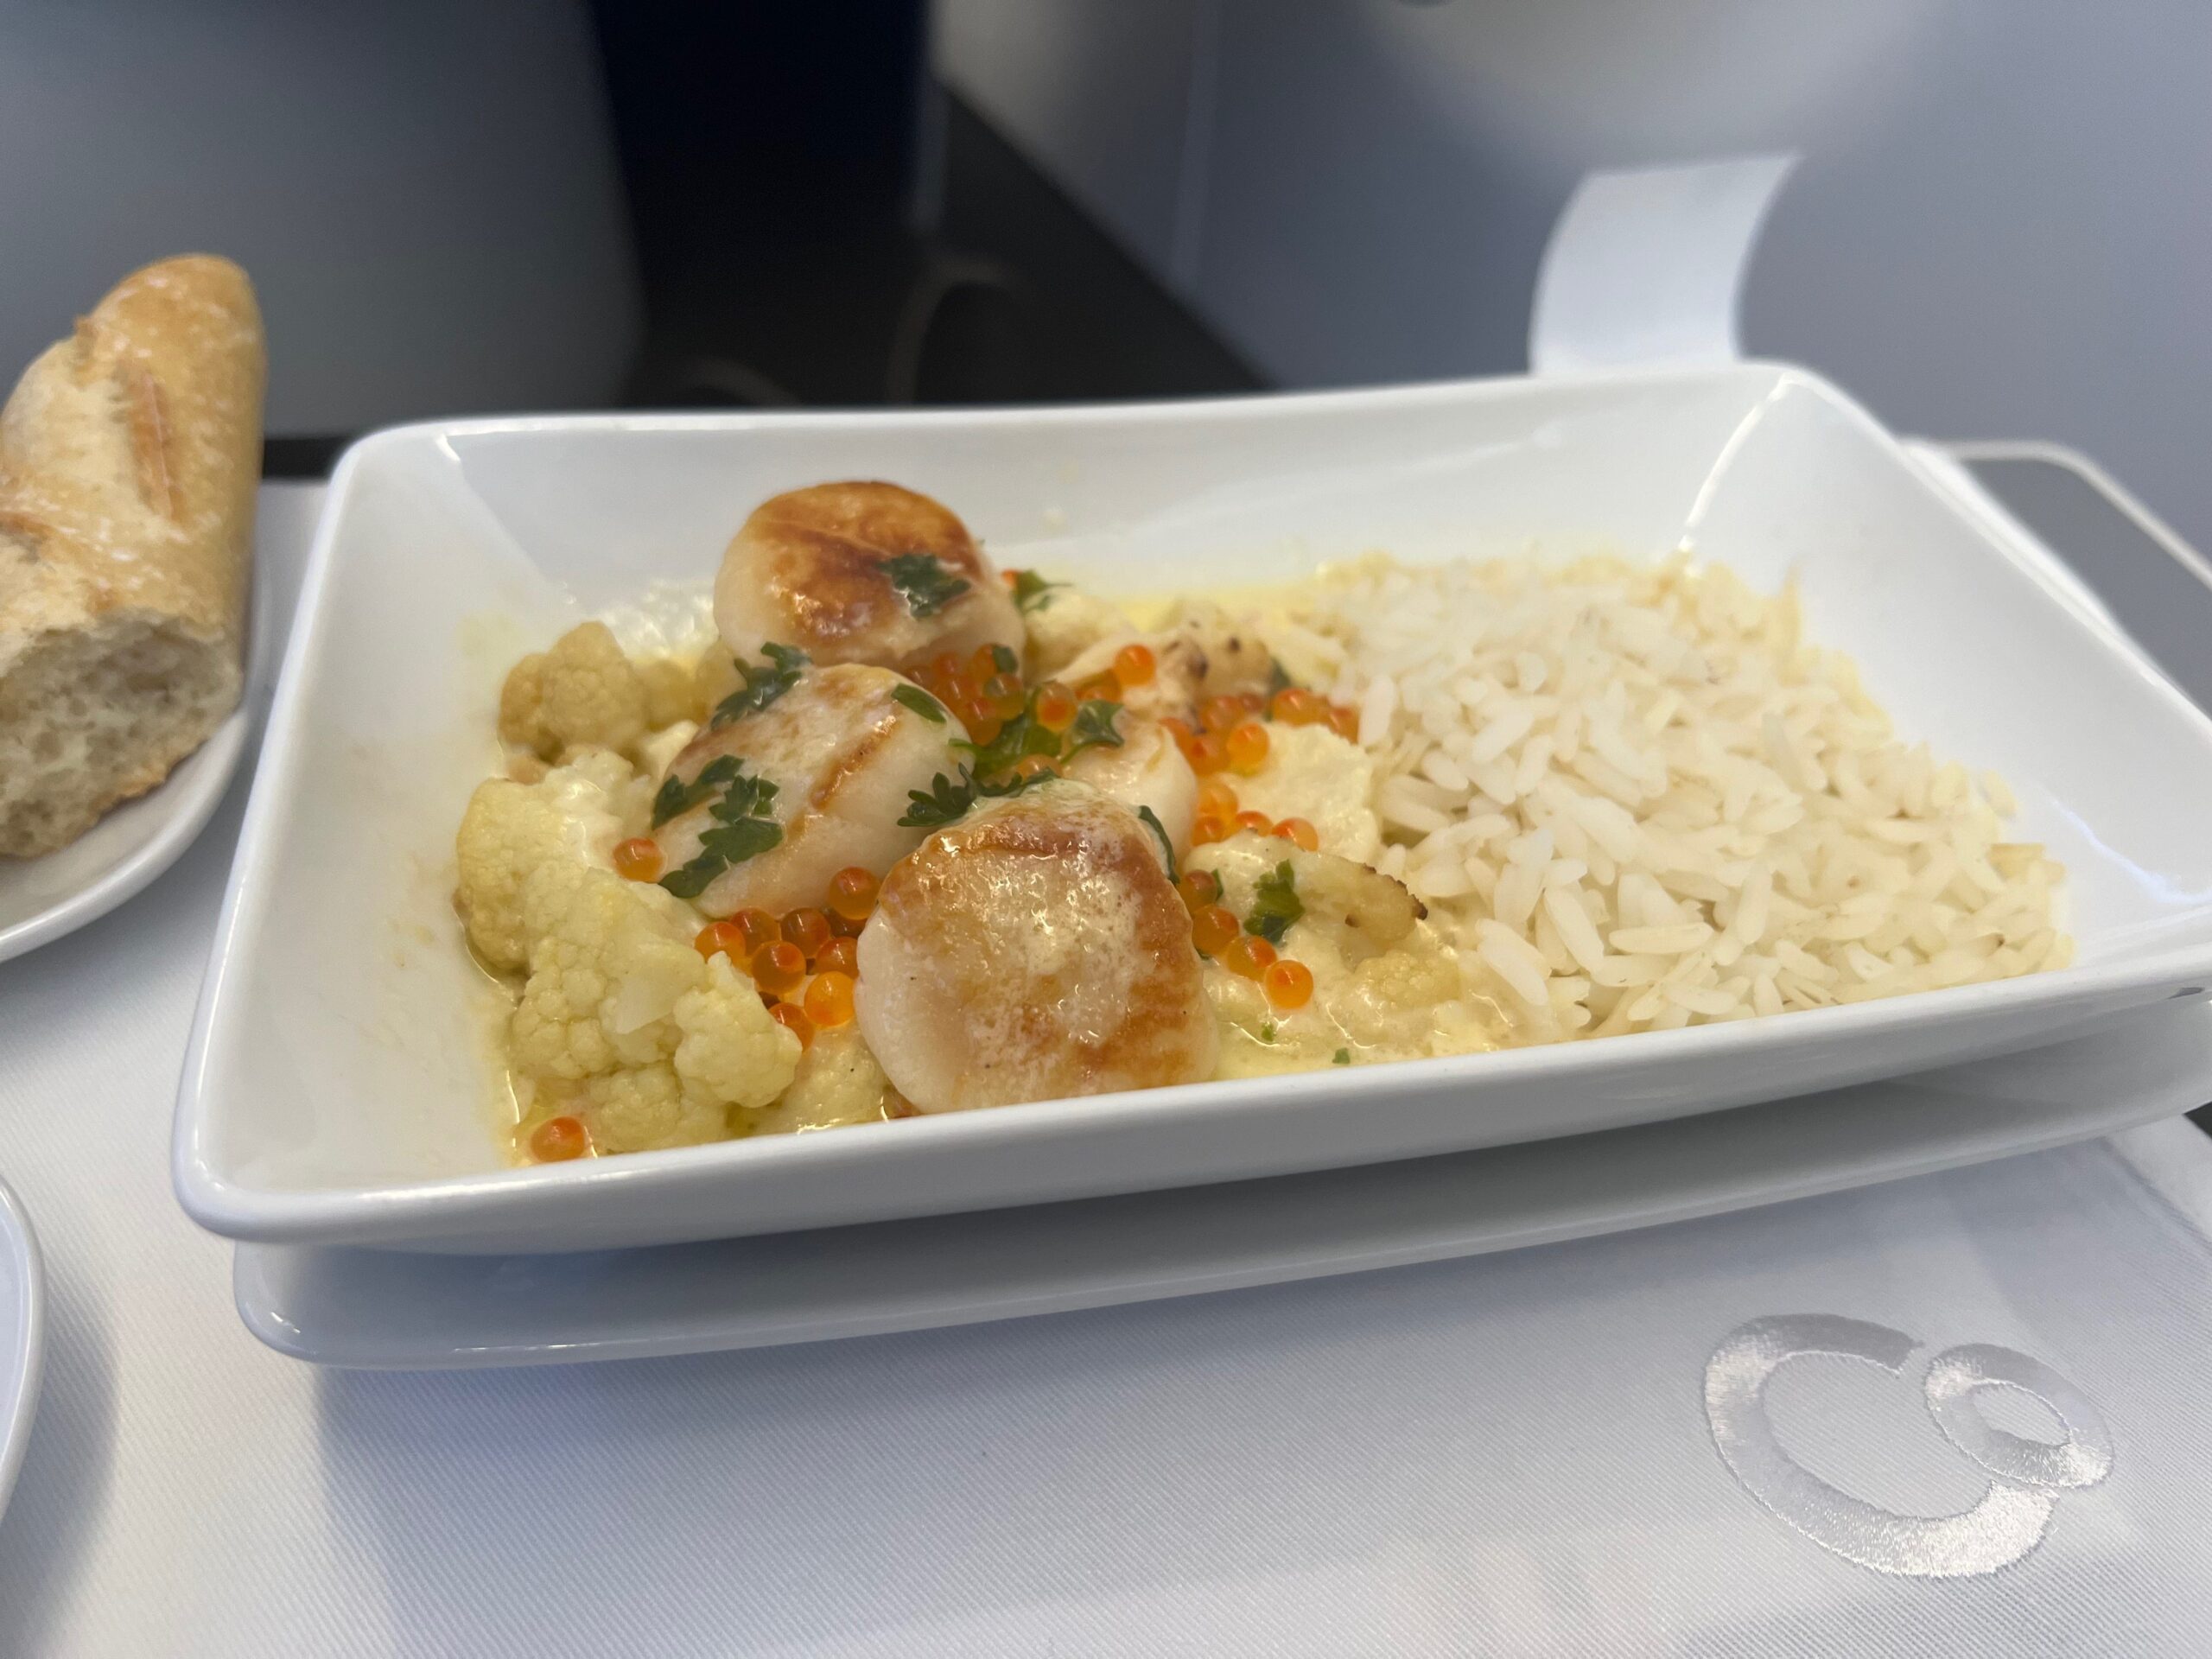 Flying on La Compagnie all-business class airline from Paris to New York &mdash; meal without the truffles.